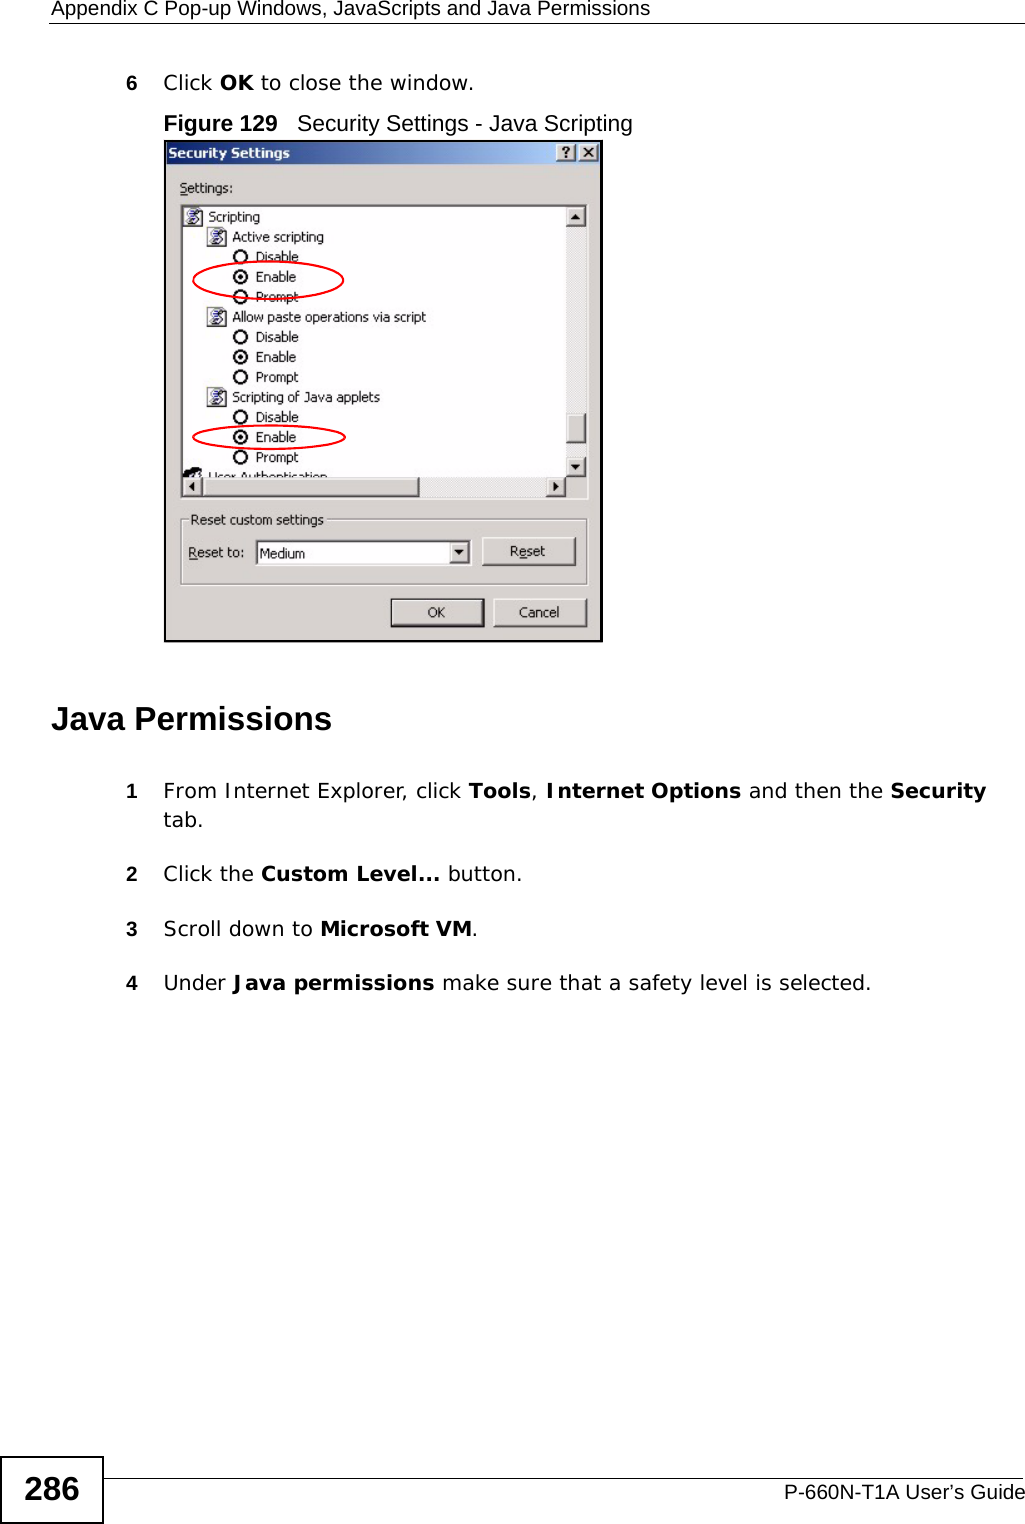 Appendix C Pop-up Windows, JavaScripts and Java PermissionsP-660N-T1A User’s Guide2866Click OK to close the window.Figure 129   Security Settings - Java ScriptingJava Permissions1From Internet Explorer, click Tools, Internet Options and then the Security tab. 2Click the Custom Level... button. 3Scroll down to Microsoft VM. 4Under Java permissions make sure that a safety level is selected.